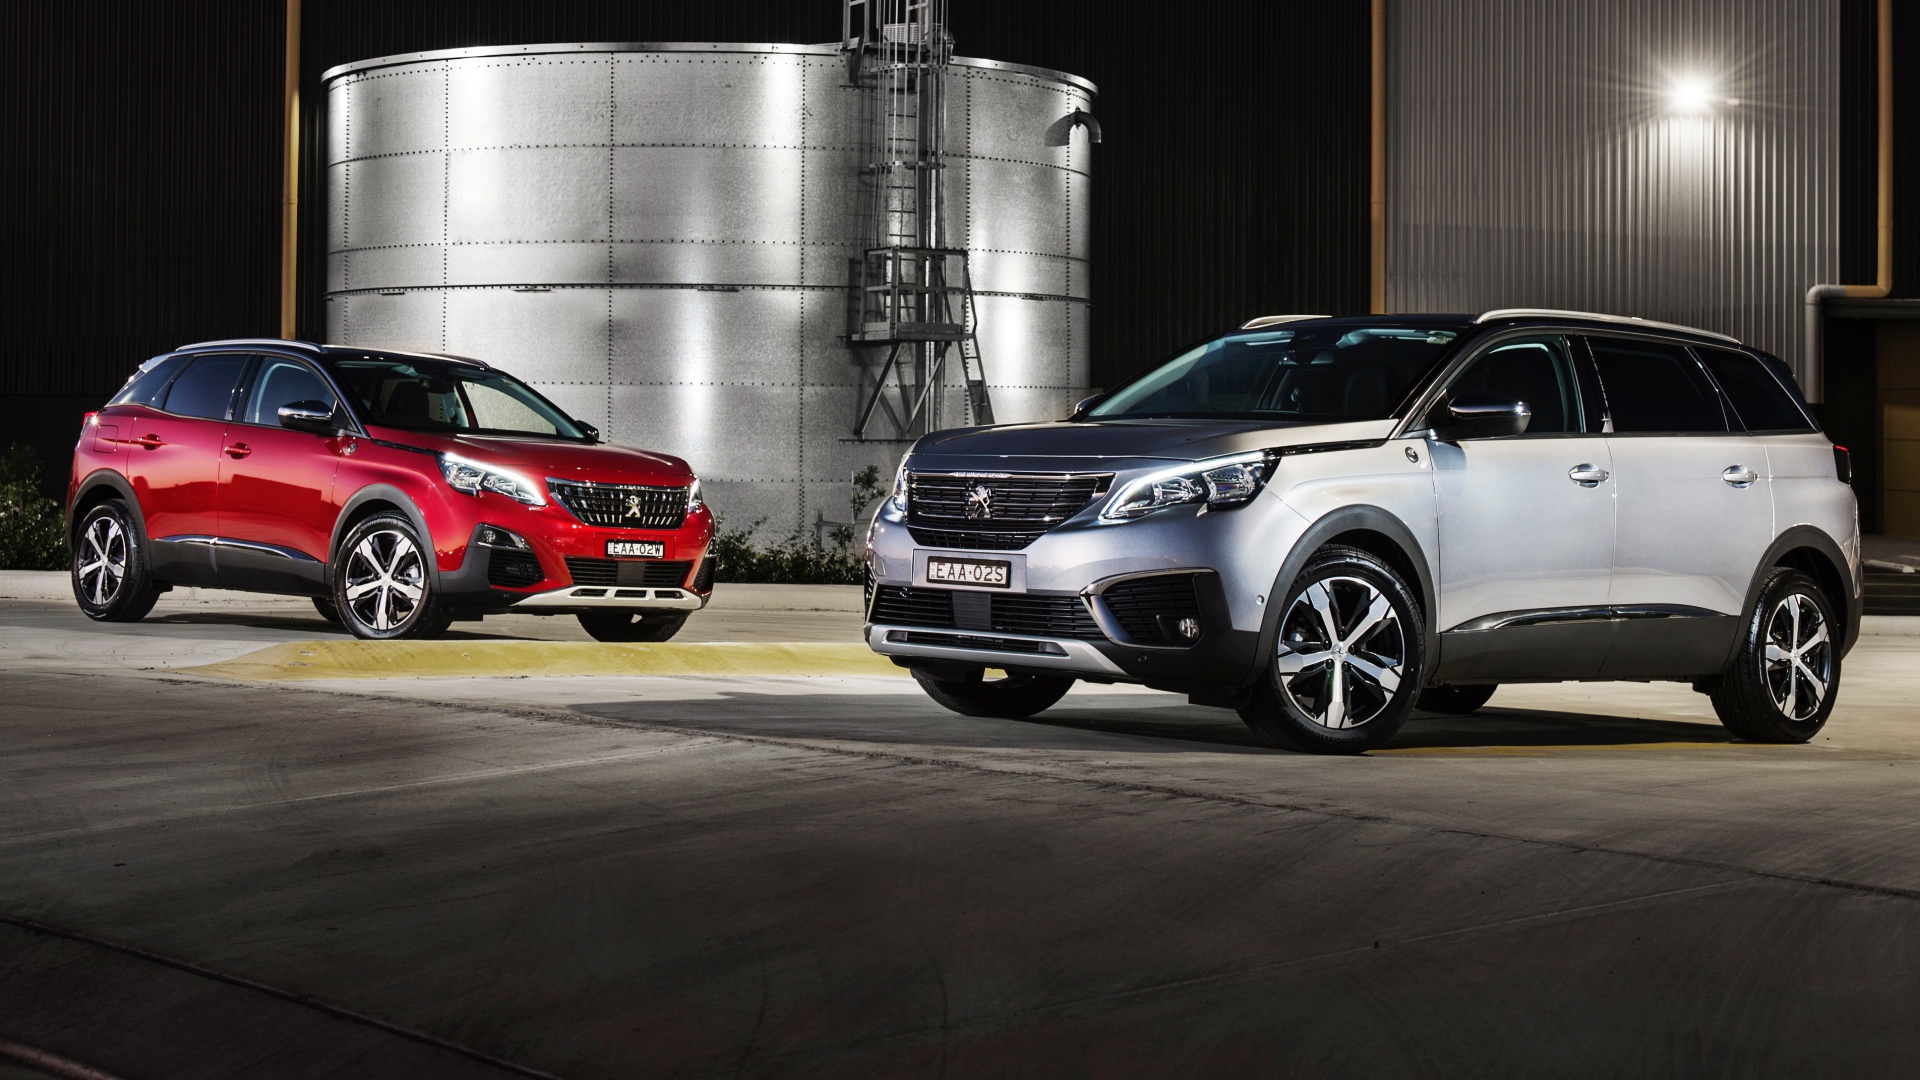 News Peugeot Reveals 3008, 5008 Crossway Editions For